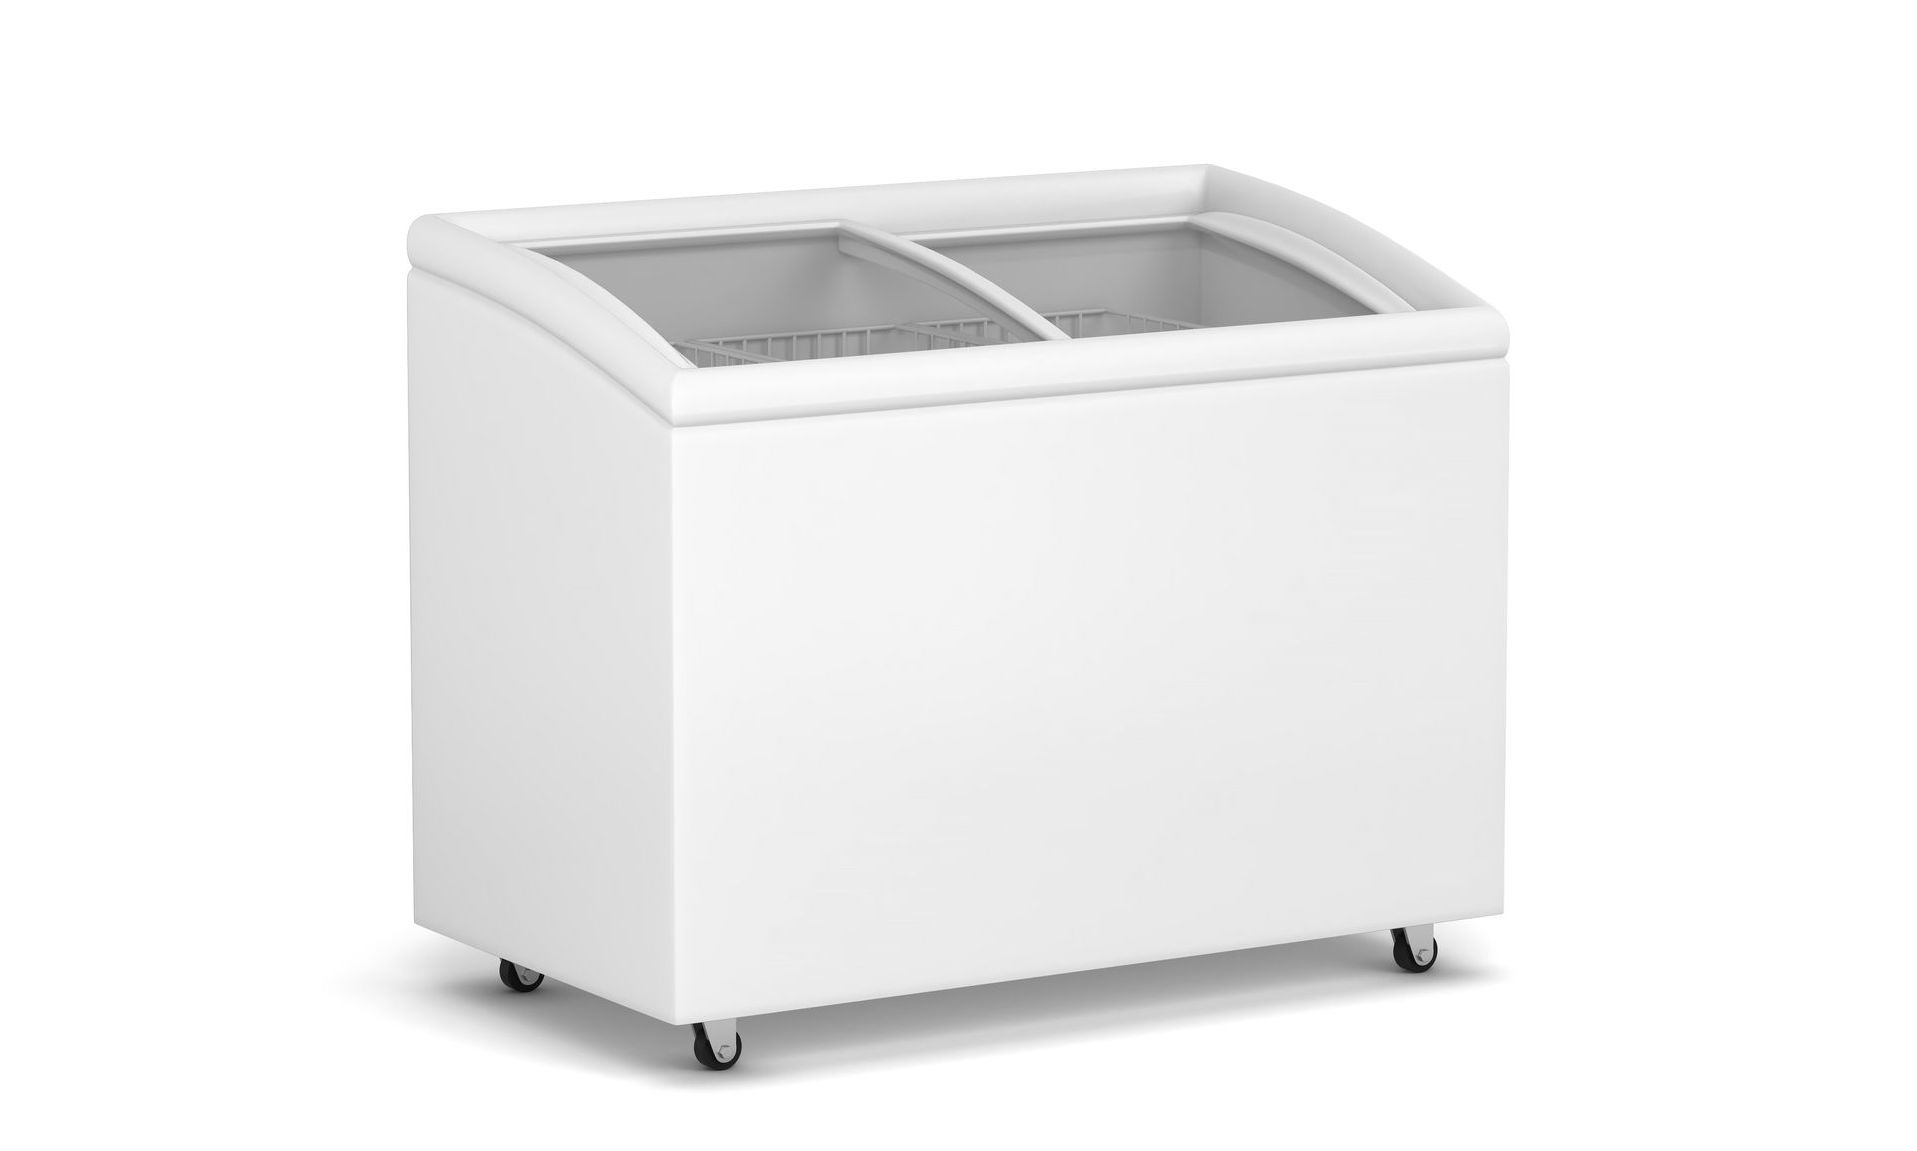 A white freezer with wheels and a glass door on a white background.